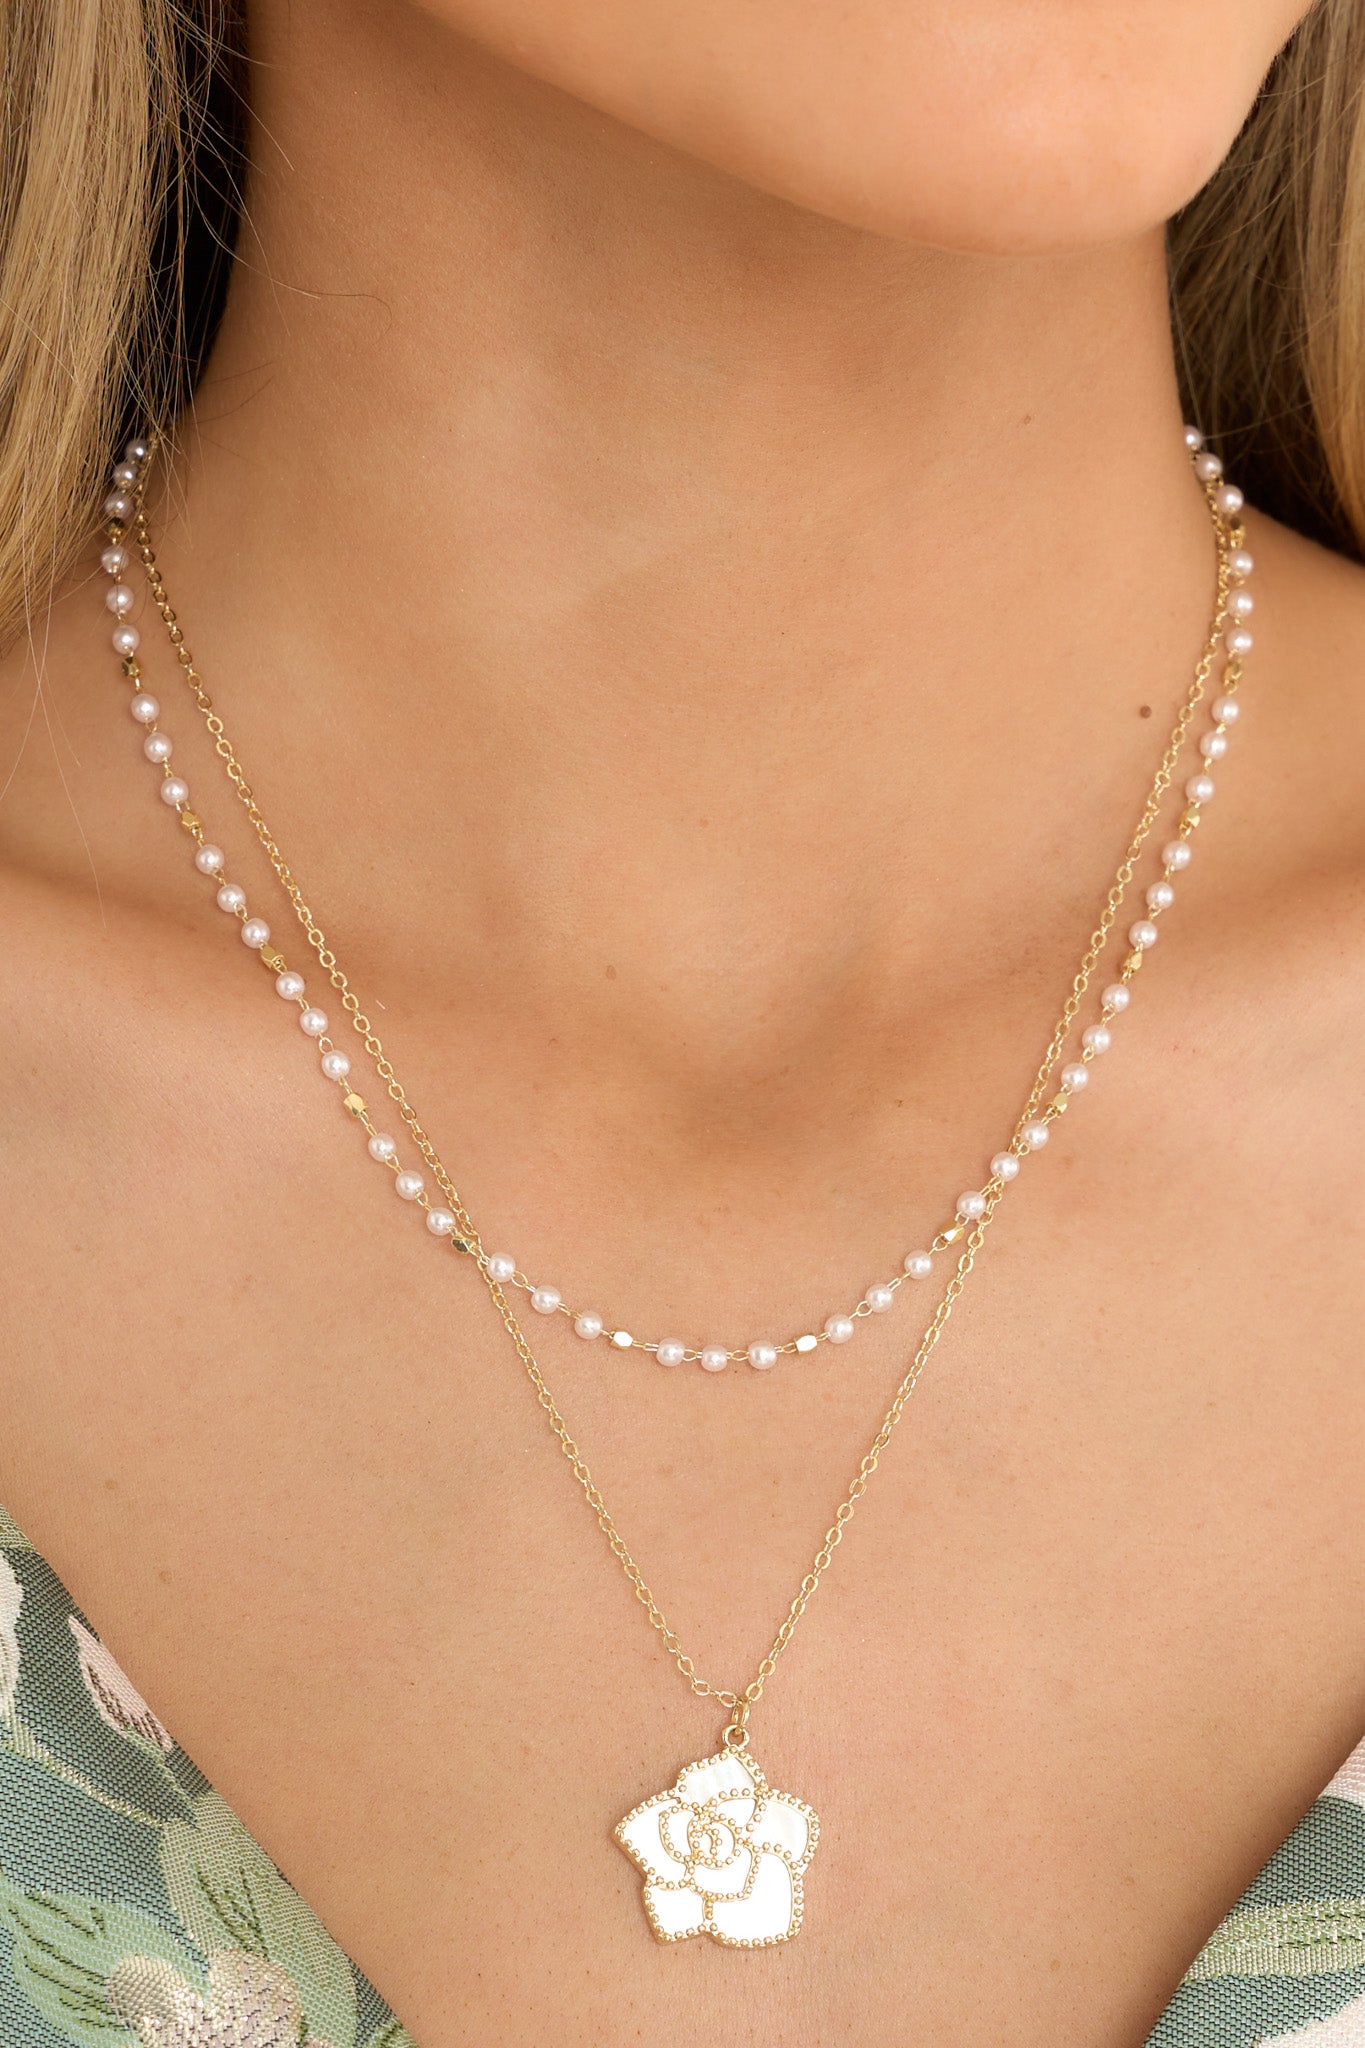 This gold and pearl necklace features gold hardware, a dainty faux pearl chain, a chain with an iridescent flower pendant, and a lobster claw closure. 